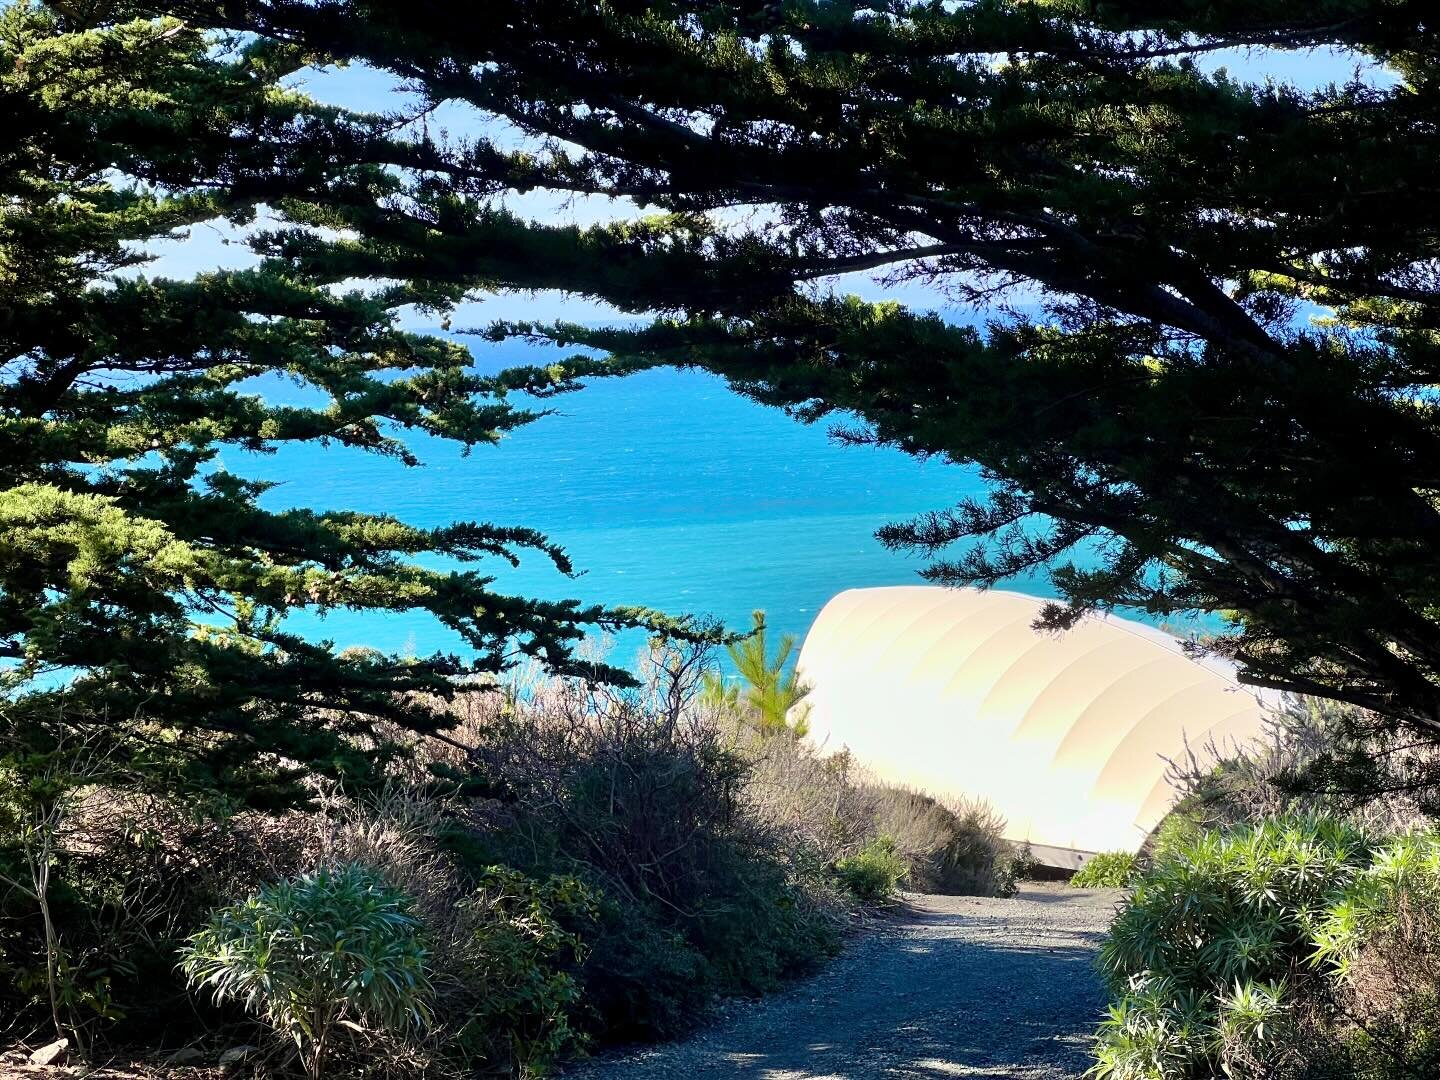 On the trail to the Autonomois Tent collection at Treebones Resort, this is the first look you&rsquo;ll have of the units. Such a spectacular location perched above the Pacific Ocean with dramatic views.
.
.
.
.
.
#roadtrip #hwy1 #highway1 #BigSur #o